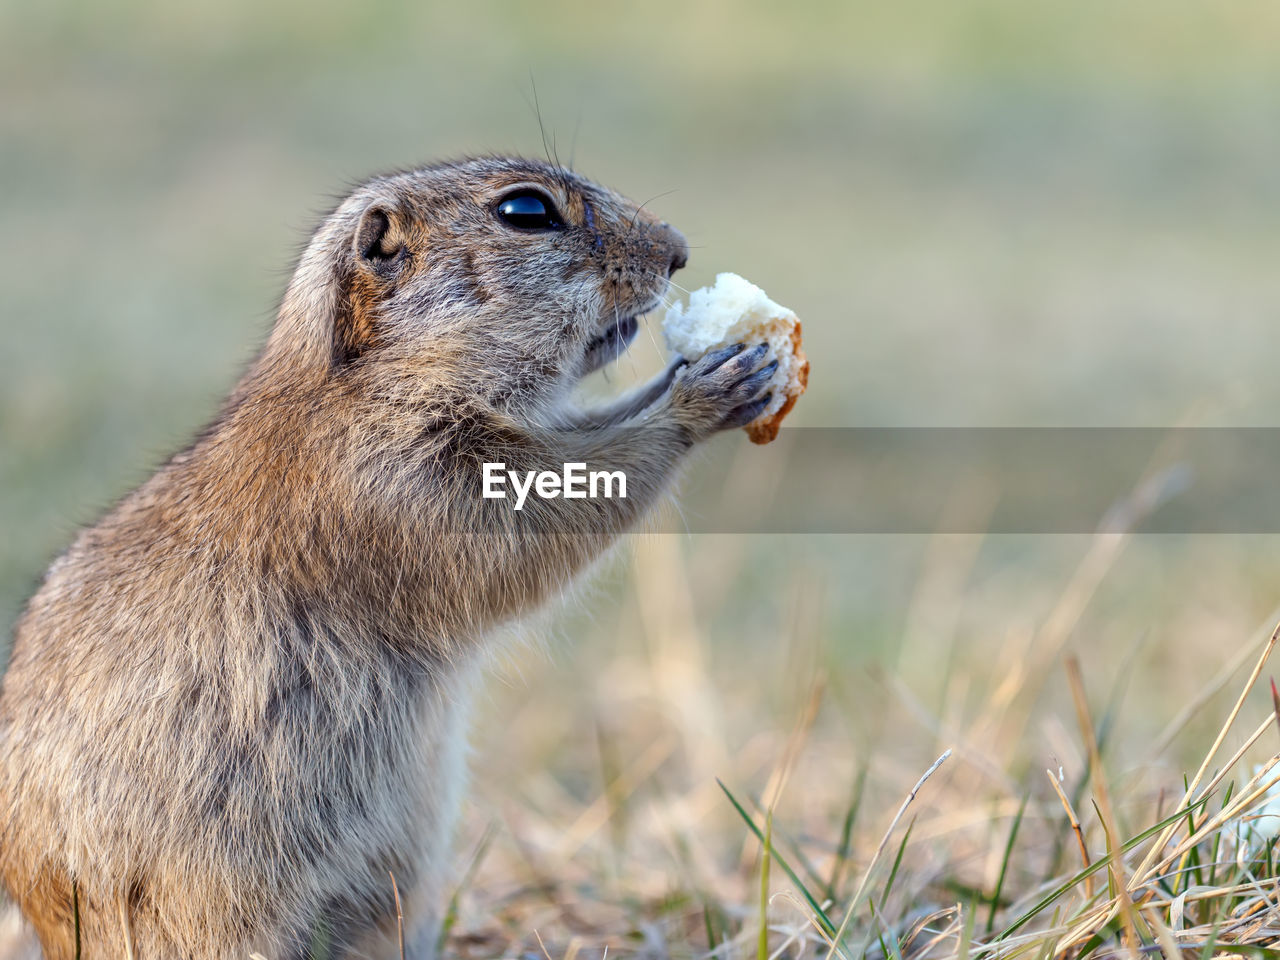 animal, animal themes, animal wildlife, wildlife, one animal, mammal, prairie dog, whiskers, squirrel, no people, side view, nature, grass, outdoors, focus on foreground, day, portrait, eating, rodent, profile view, close-up, animal body part, standing